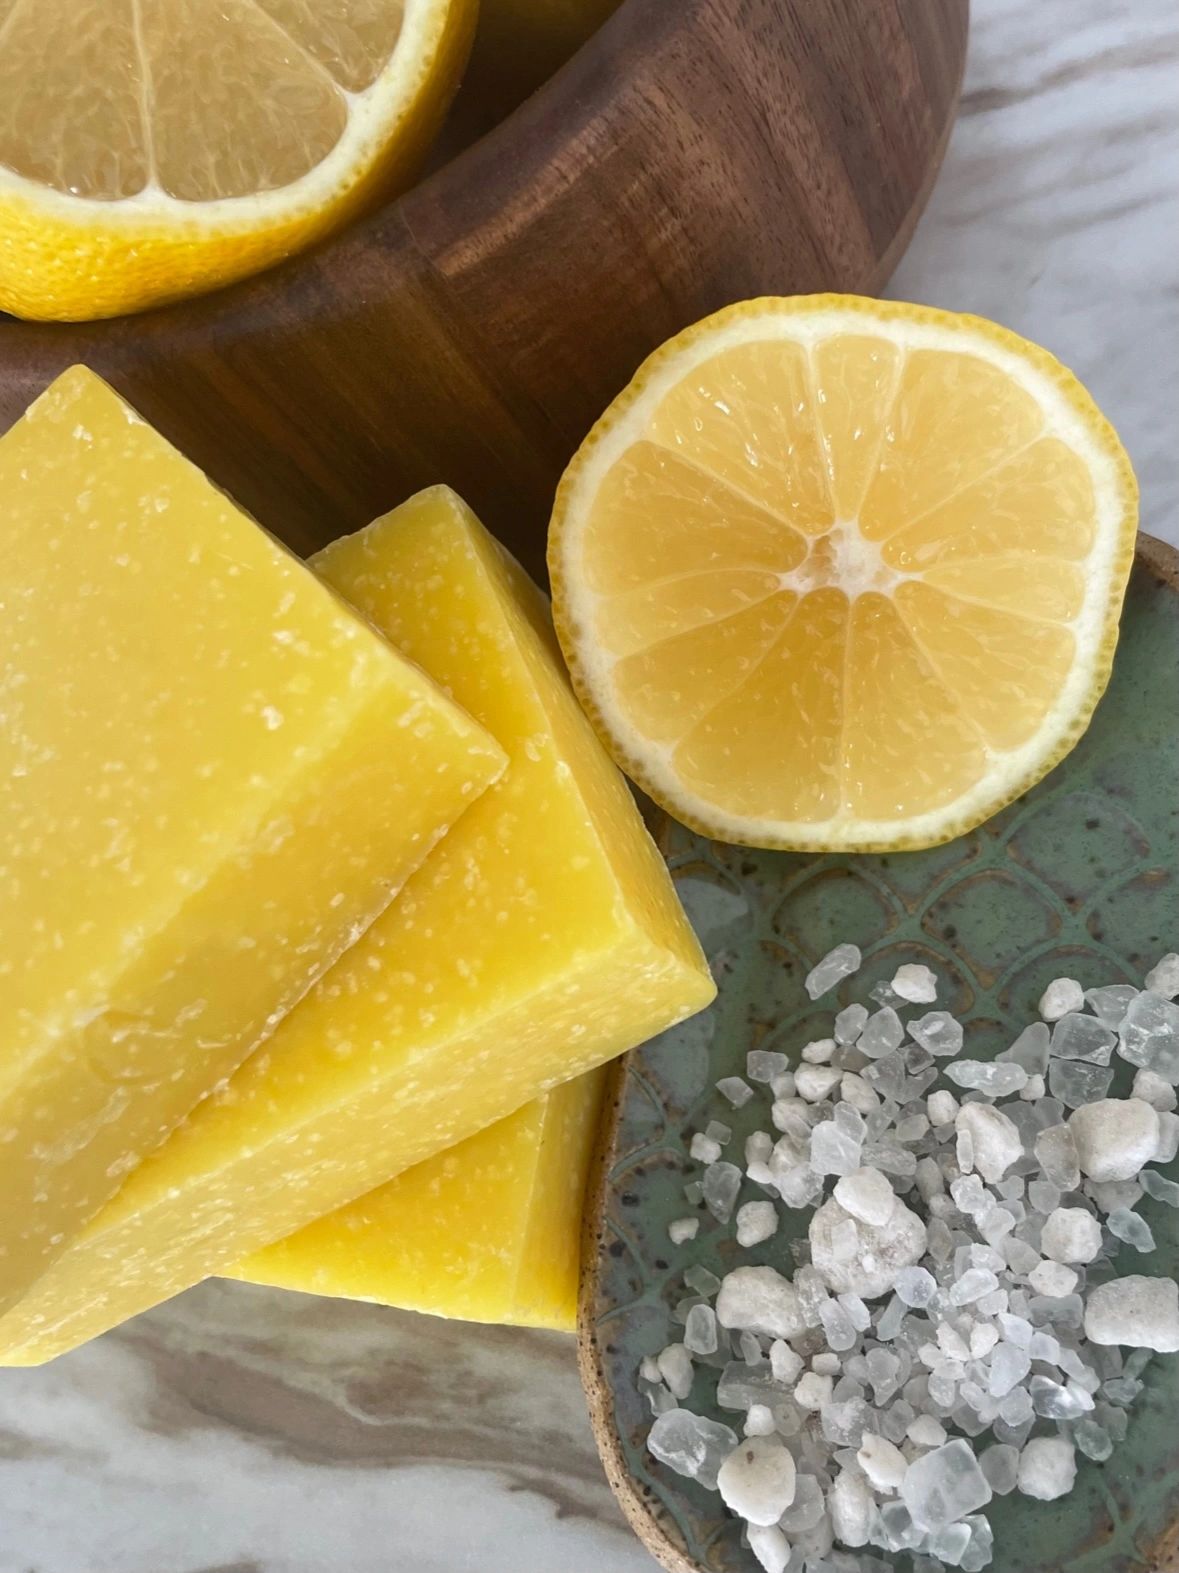 Make Your Own Soap: Grapefruit Mint Poppyseed Bars - A Beautiful Mess